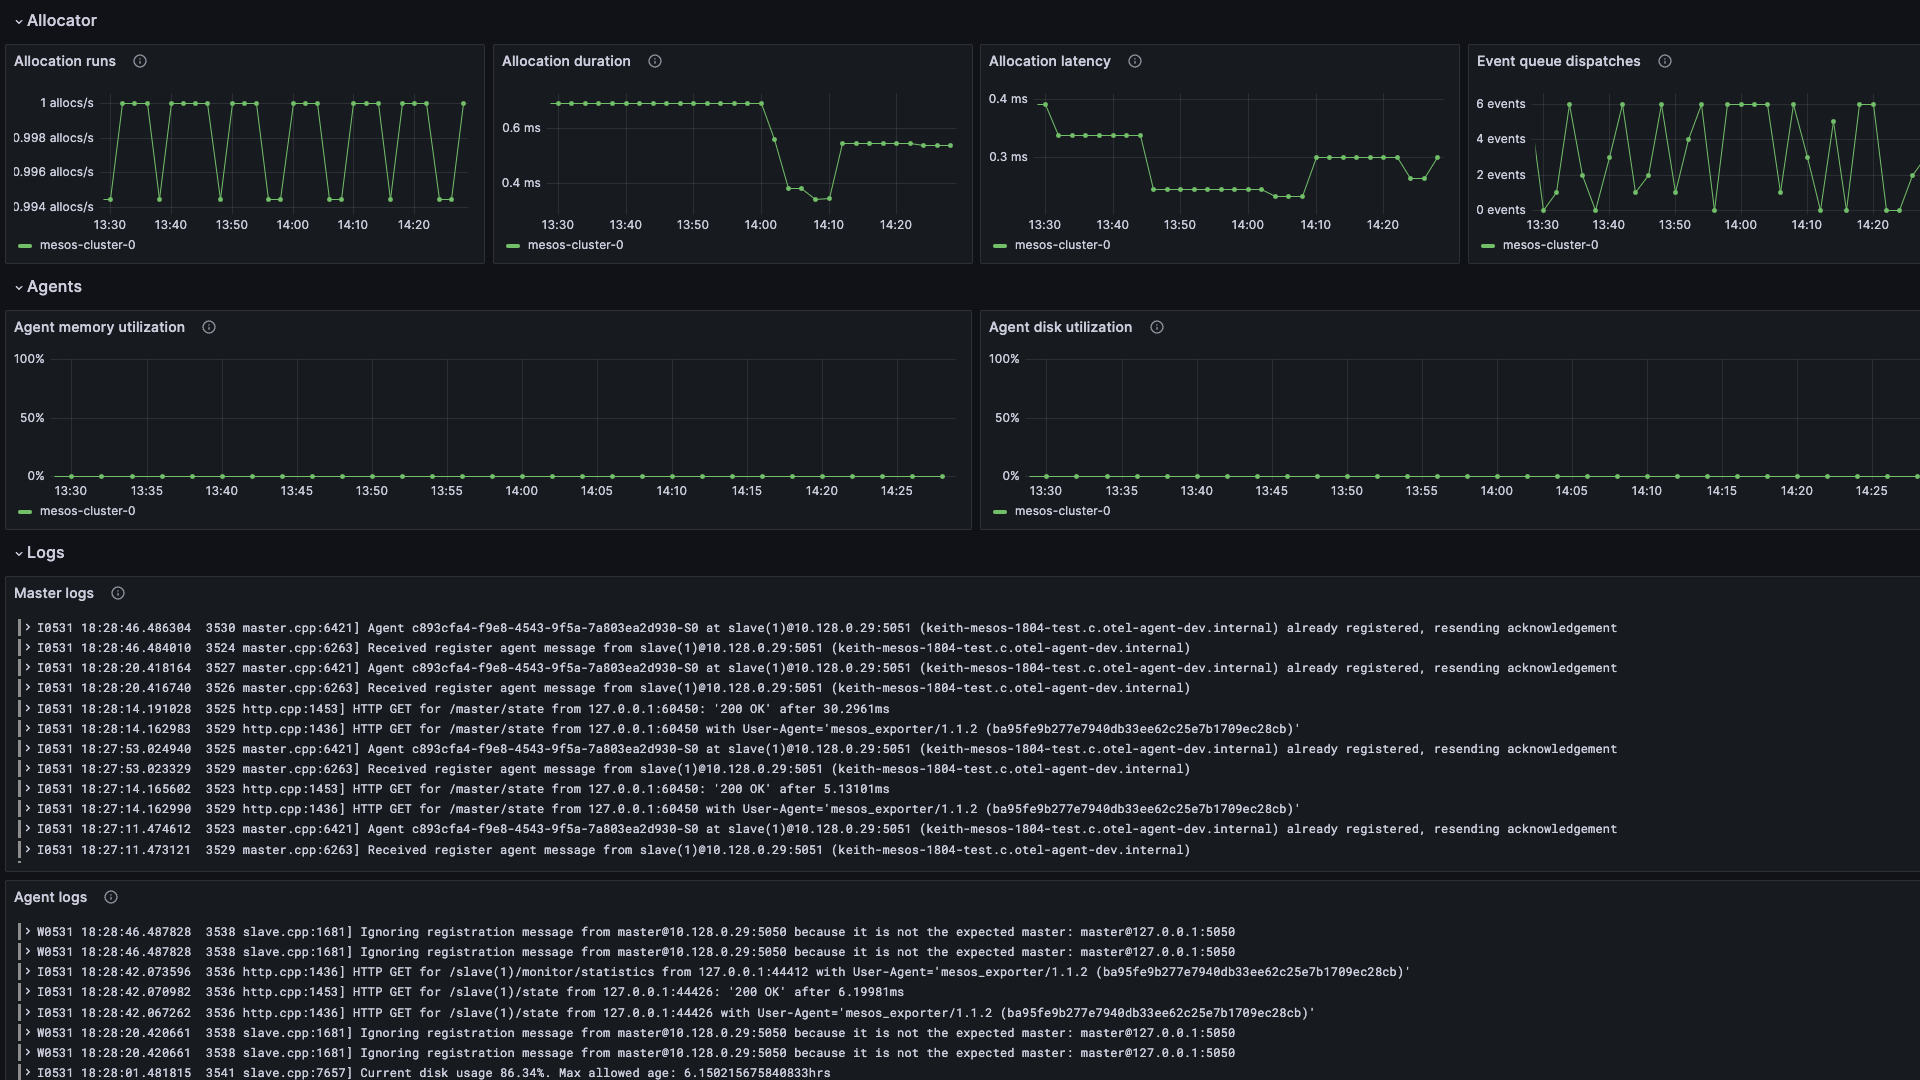 Master and agent logs are displayed in panels in the same Grafana Cloud dashboard.